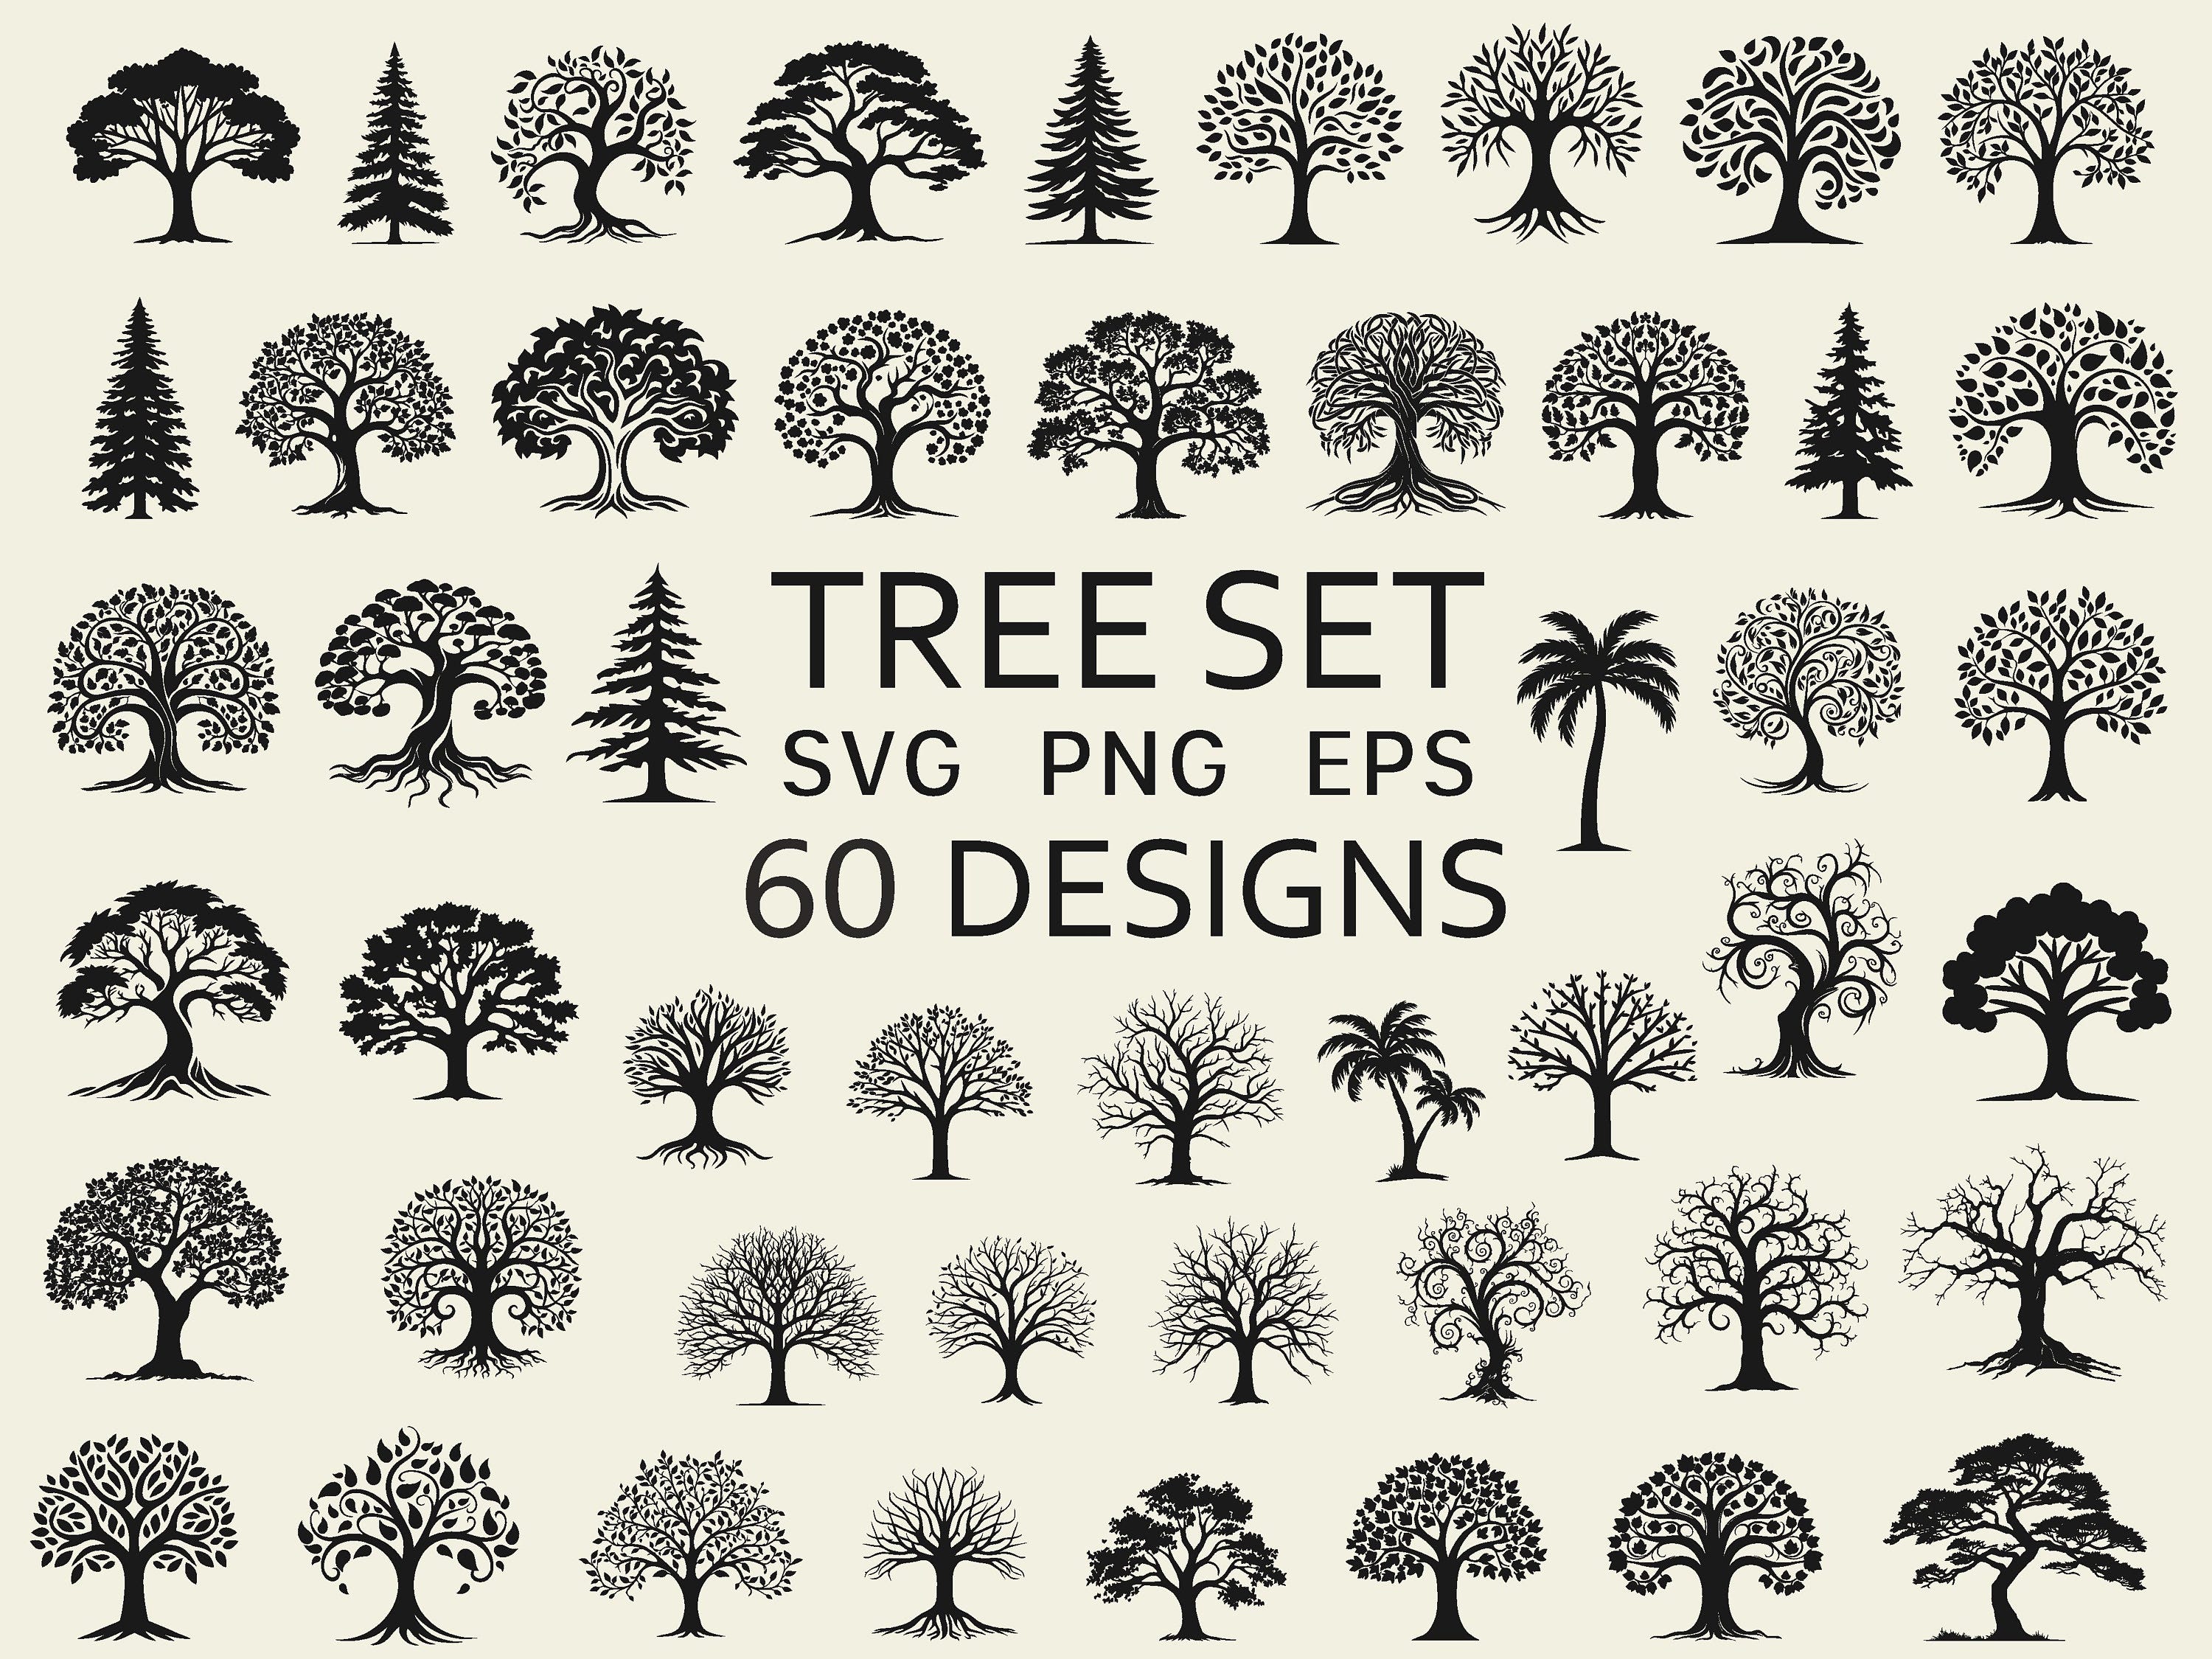 Tree Silhouette SVG Bundle - Forest Vector Bundle - Hand Drawn Trees PNG and SVG - Commercial Use - Cut Files for Cricut - Digital Download